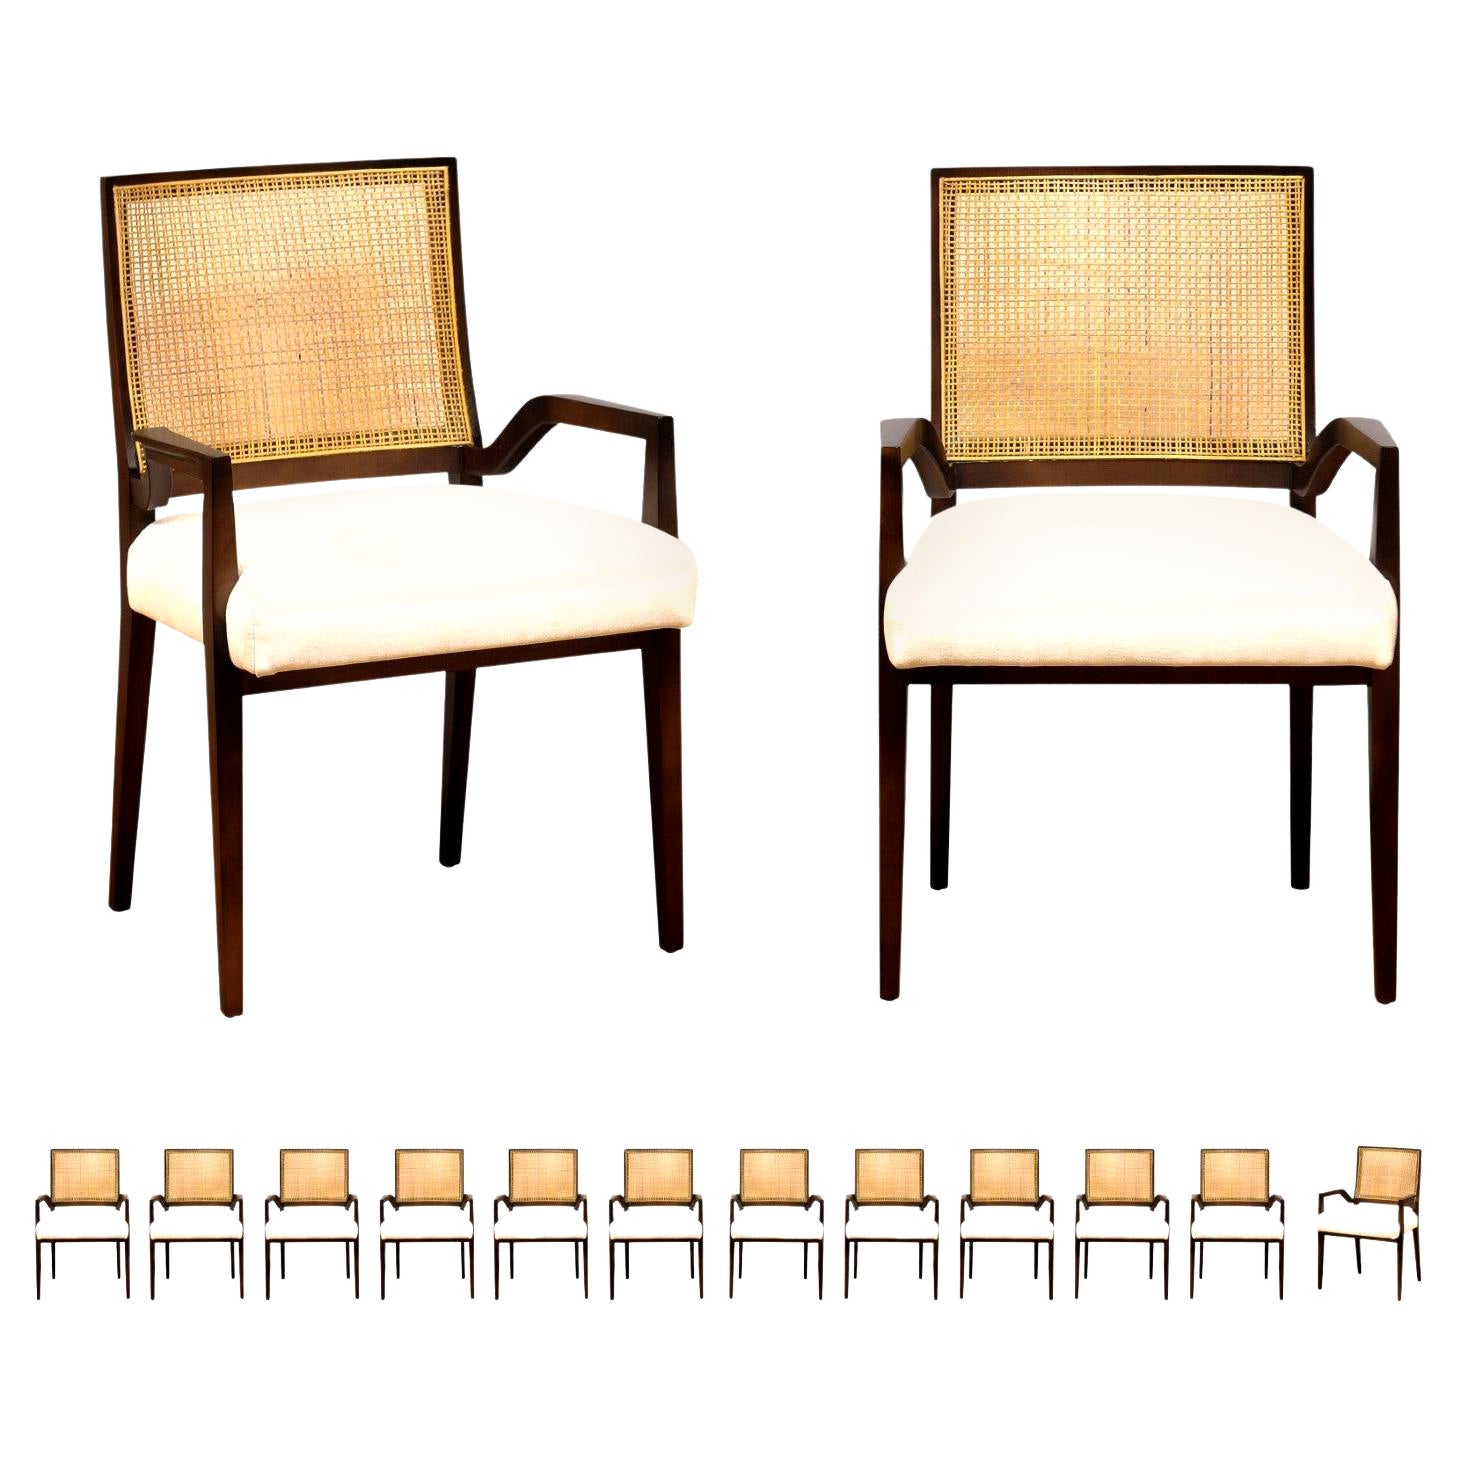 All Arms, Unrivaled Set of 14 Cane Dining Chairs by Michael Taylor, circa 1960 For Sale